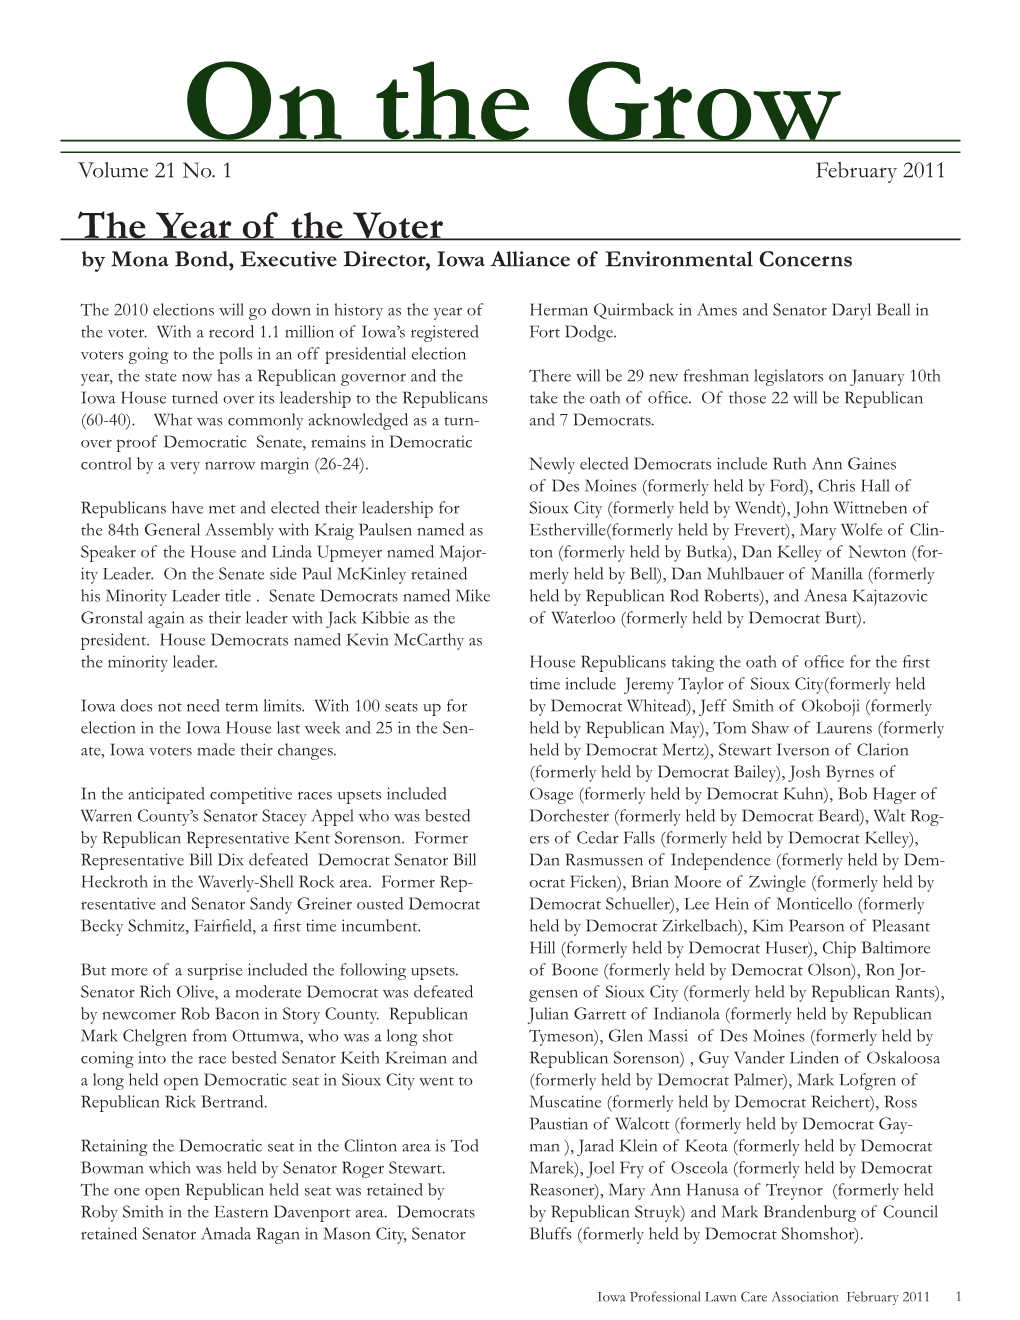 The Year of the Voter by Mona Bond, Executive Director, Iowa Alliance of Environmental Concerns